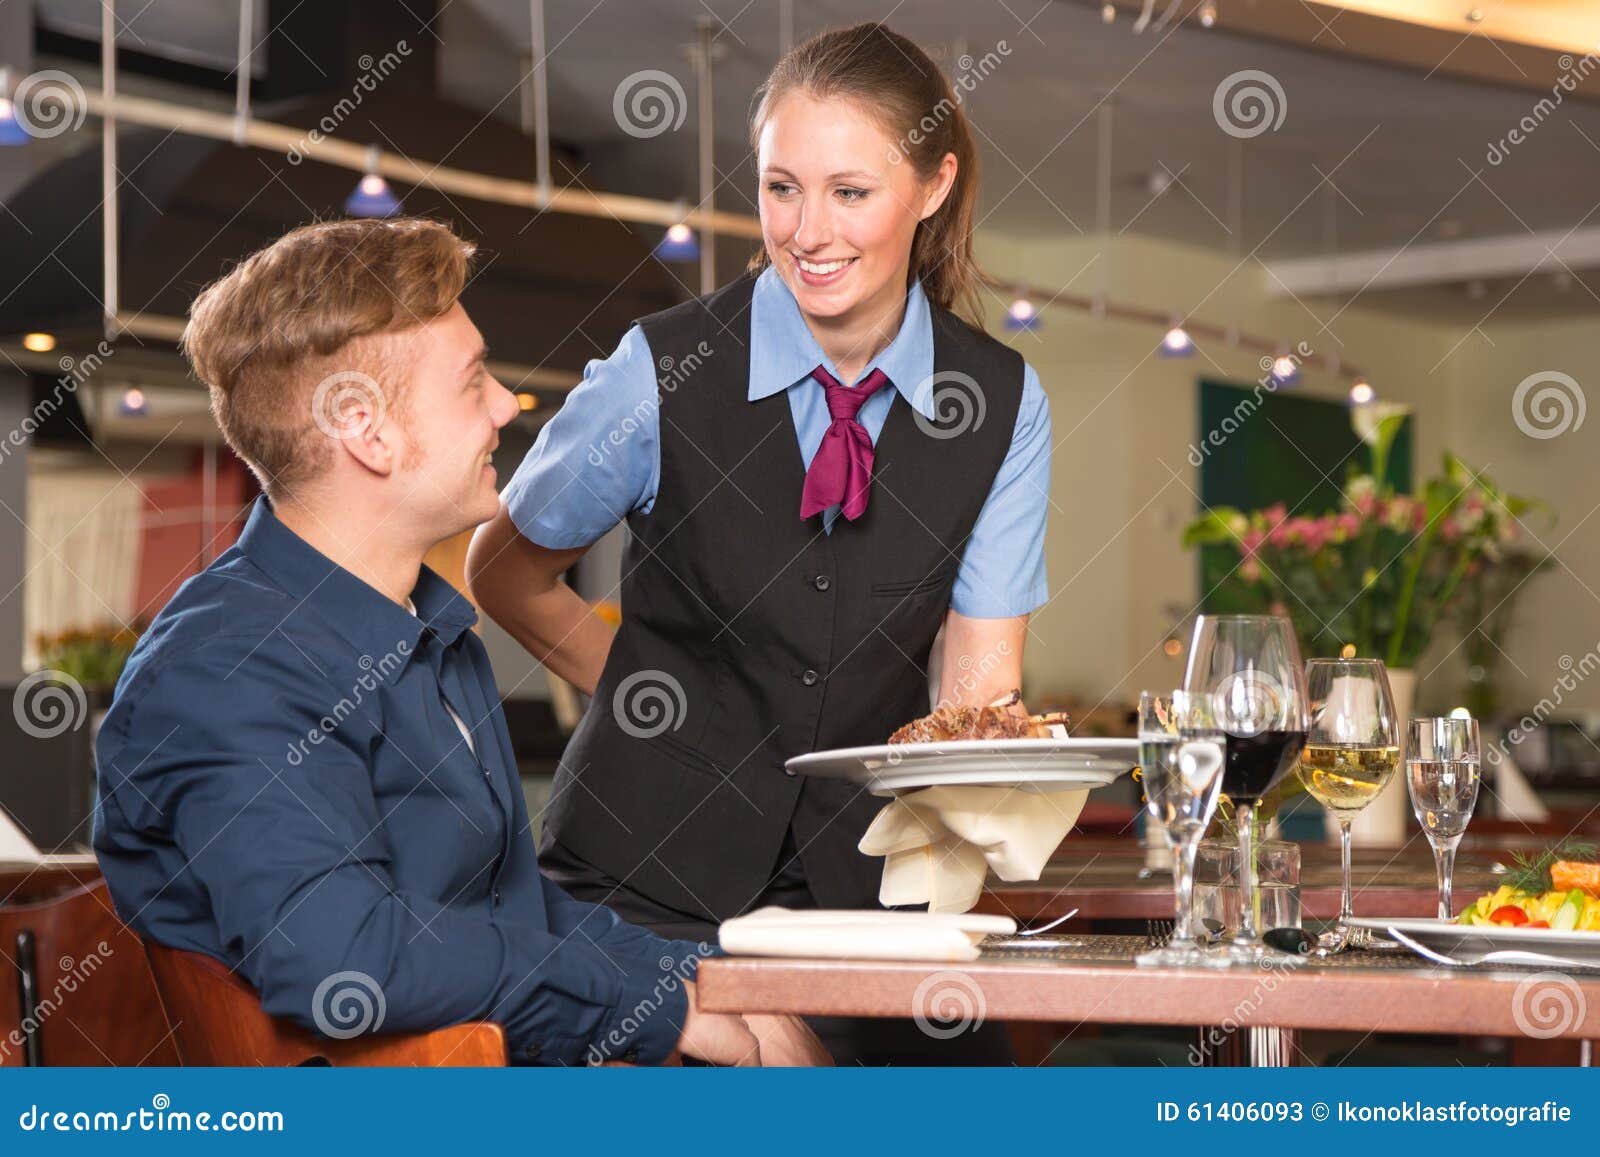 waitress serving the meal to guest in restaurant